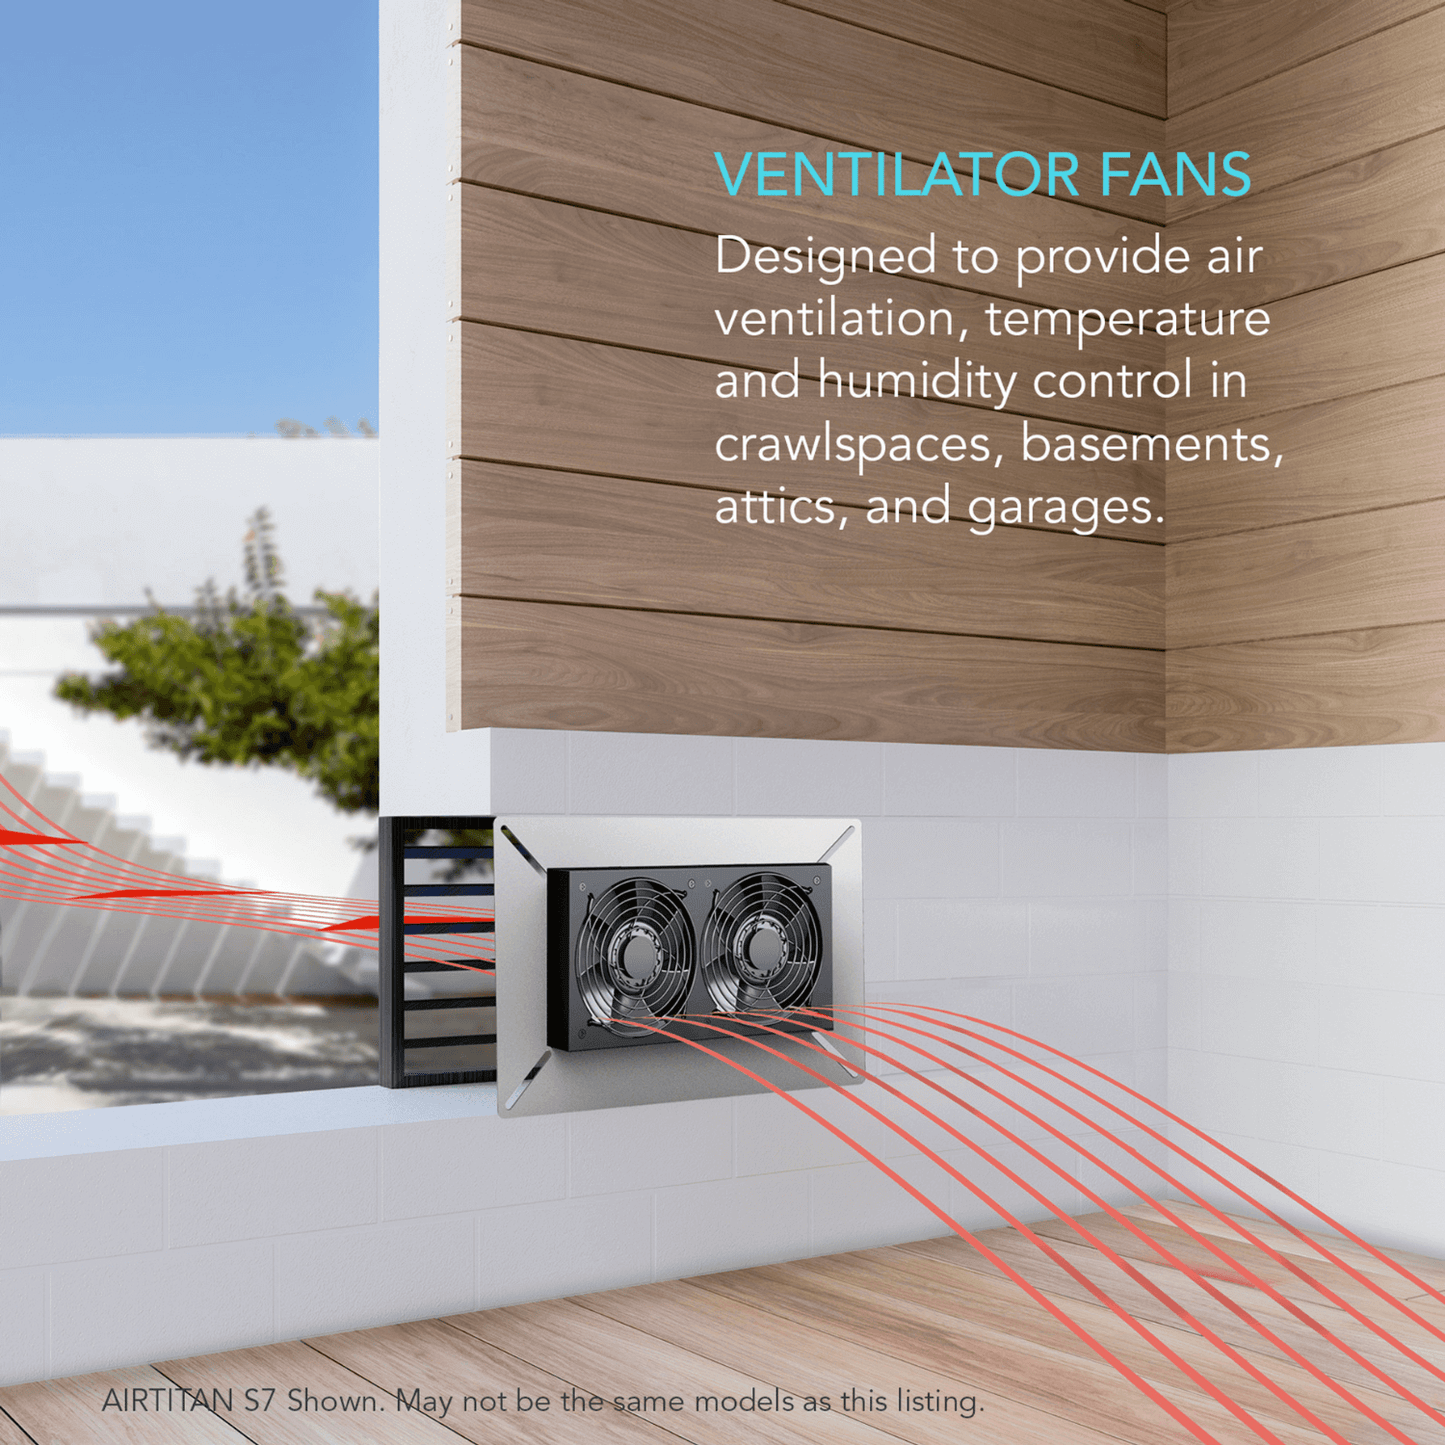 AC Infinity AIRTITAN T3, Crawlspace and Basement Ventilation Fan 6", WiFi-Integrated Controls, IP-55 Rated AC-ATT3 Climate Control 819137020467